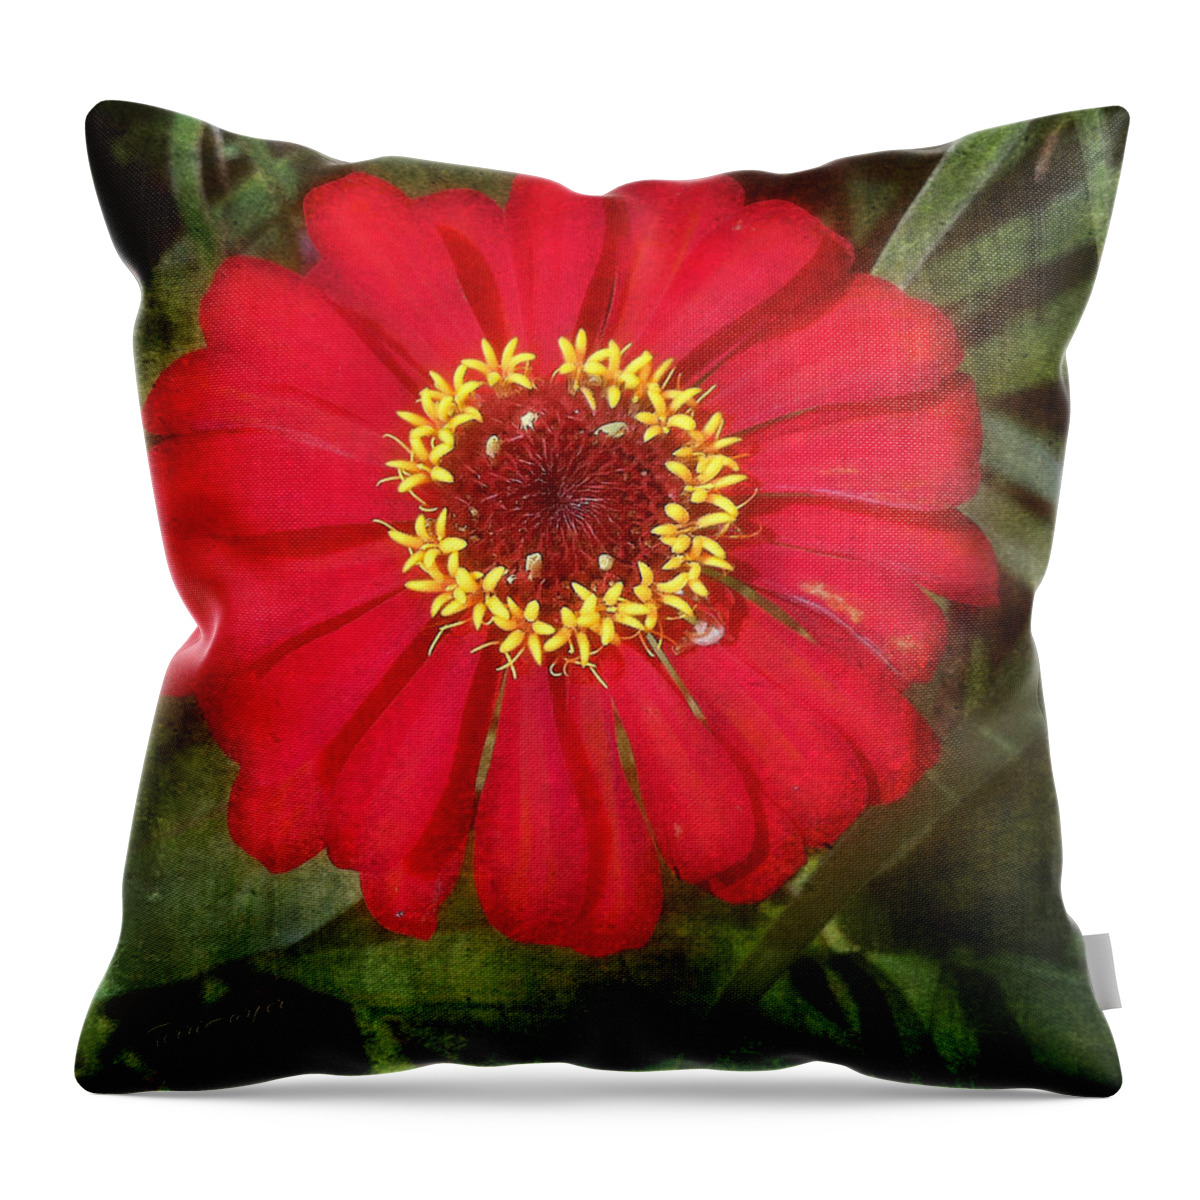 Lady Throw Pillow featuring the photograph Lady In Red by Terri Harper